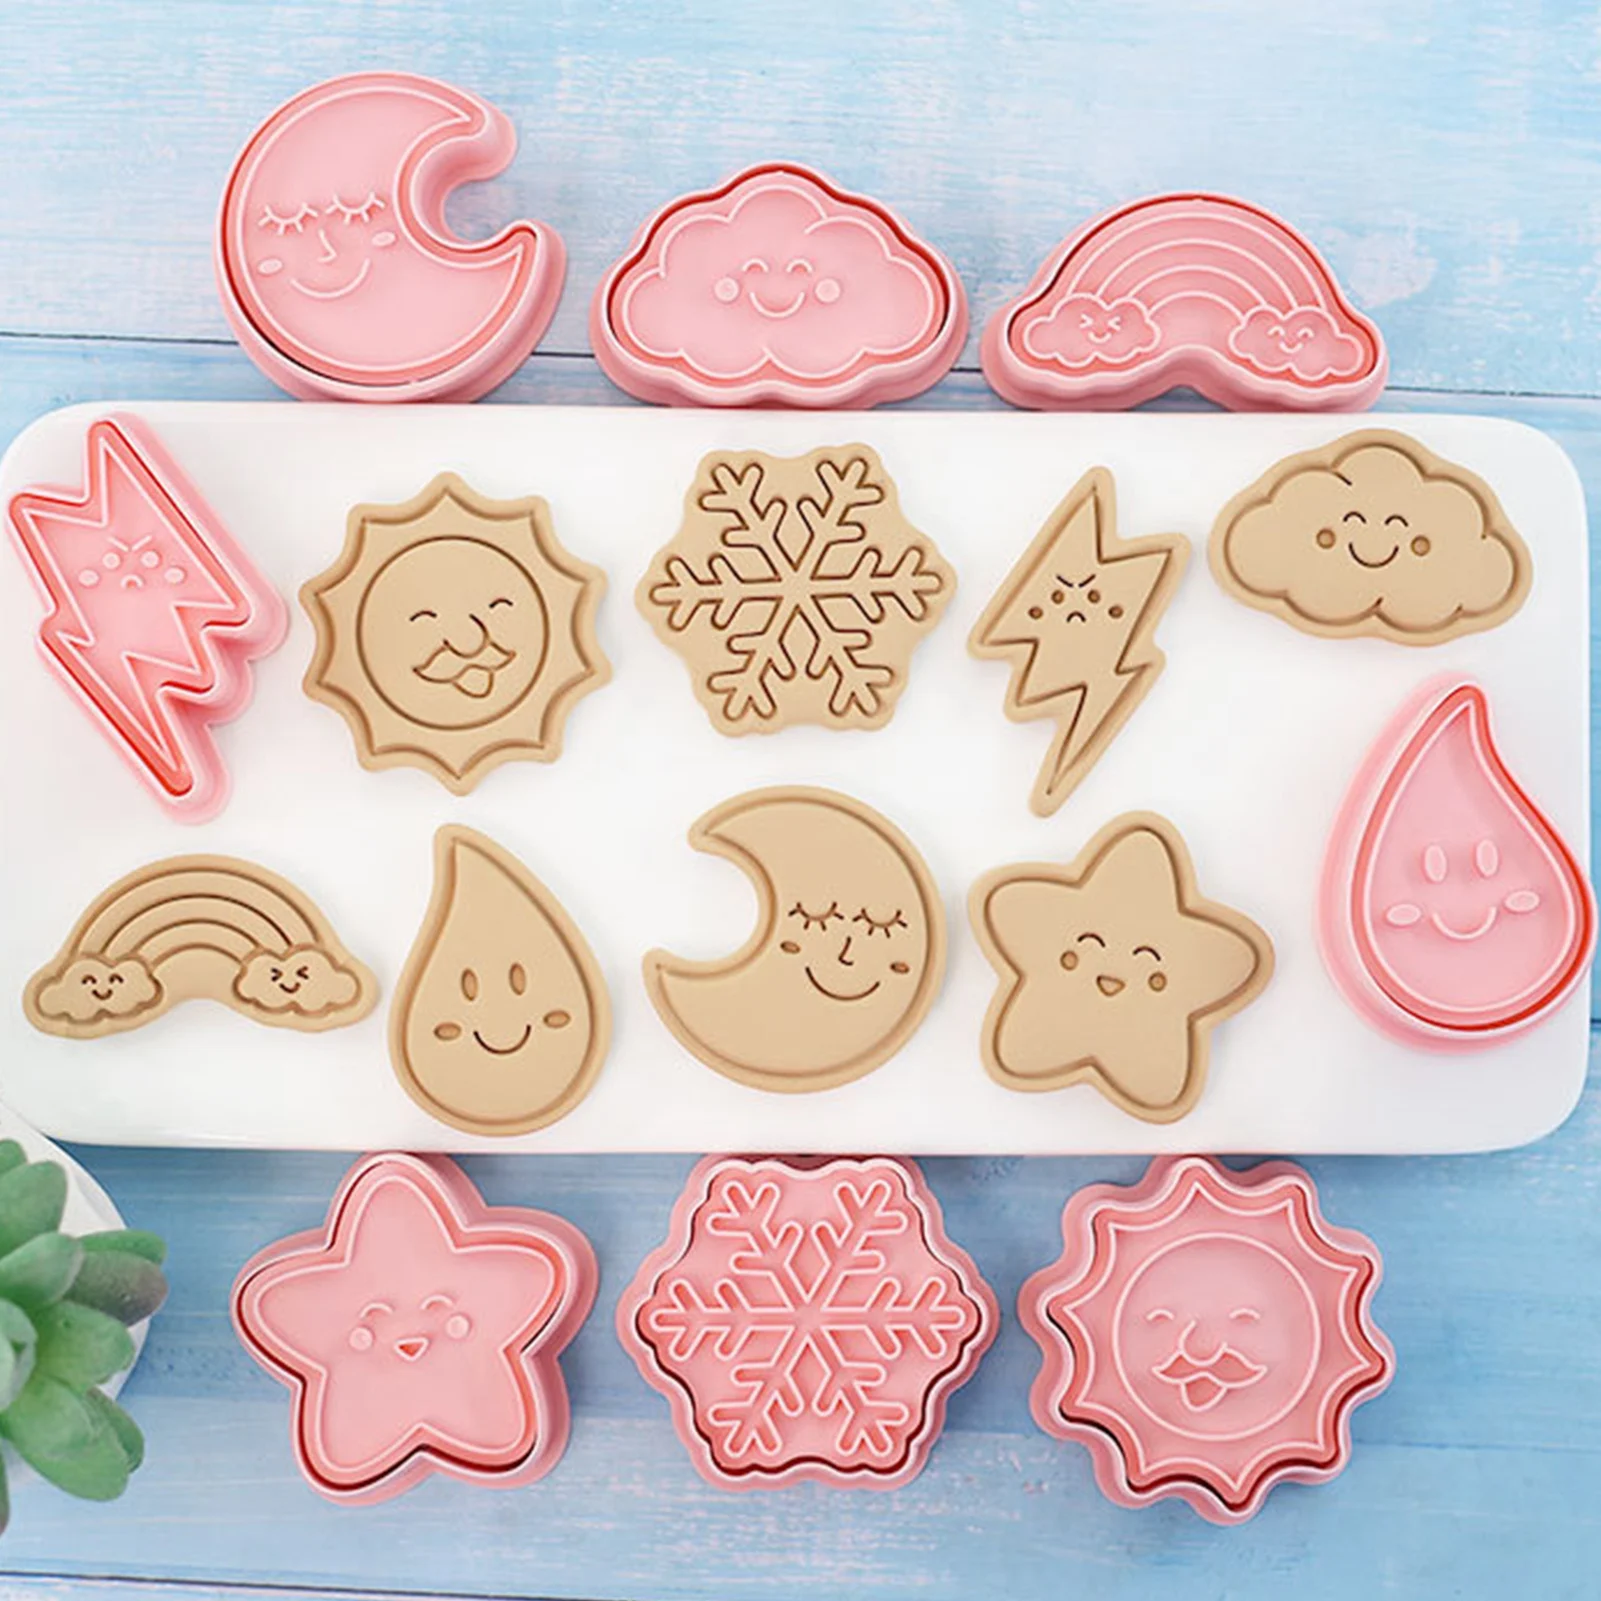 

8Pcs Cute Weather Cookie Cutter Set Cartoon Cloud Moon Star Fondant Biscuit Pastry Cookie Press Stamp Biscuit Mold Baking Tools